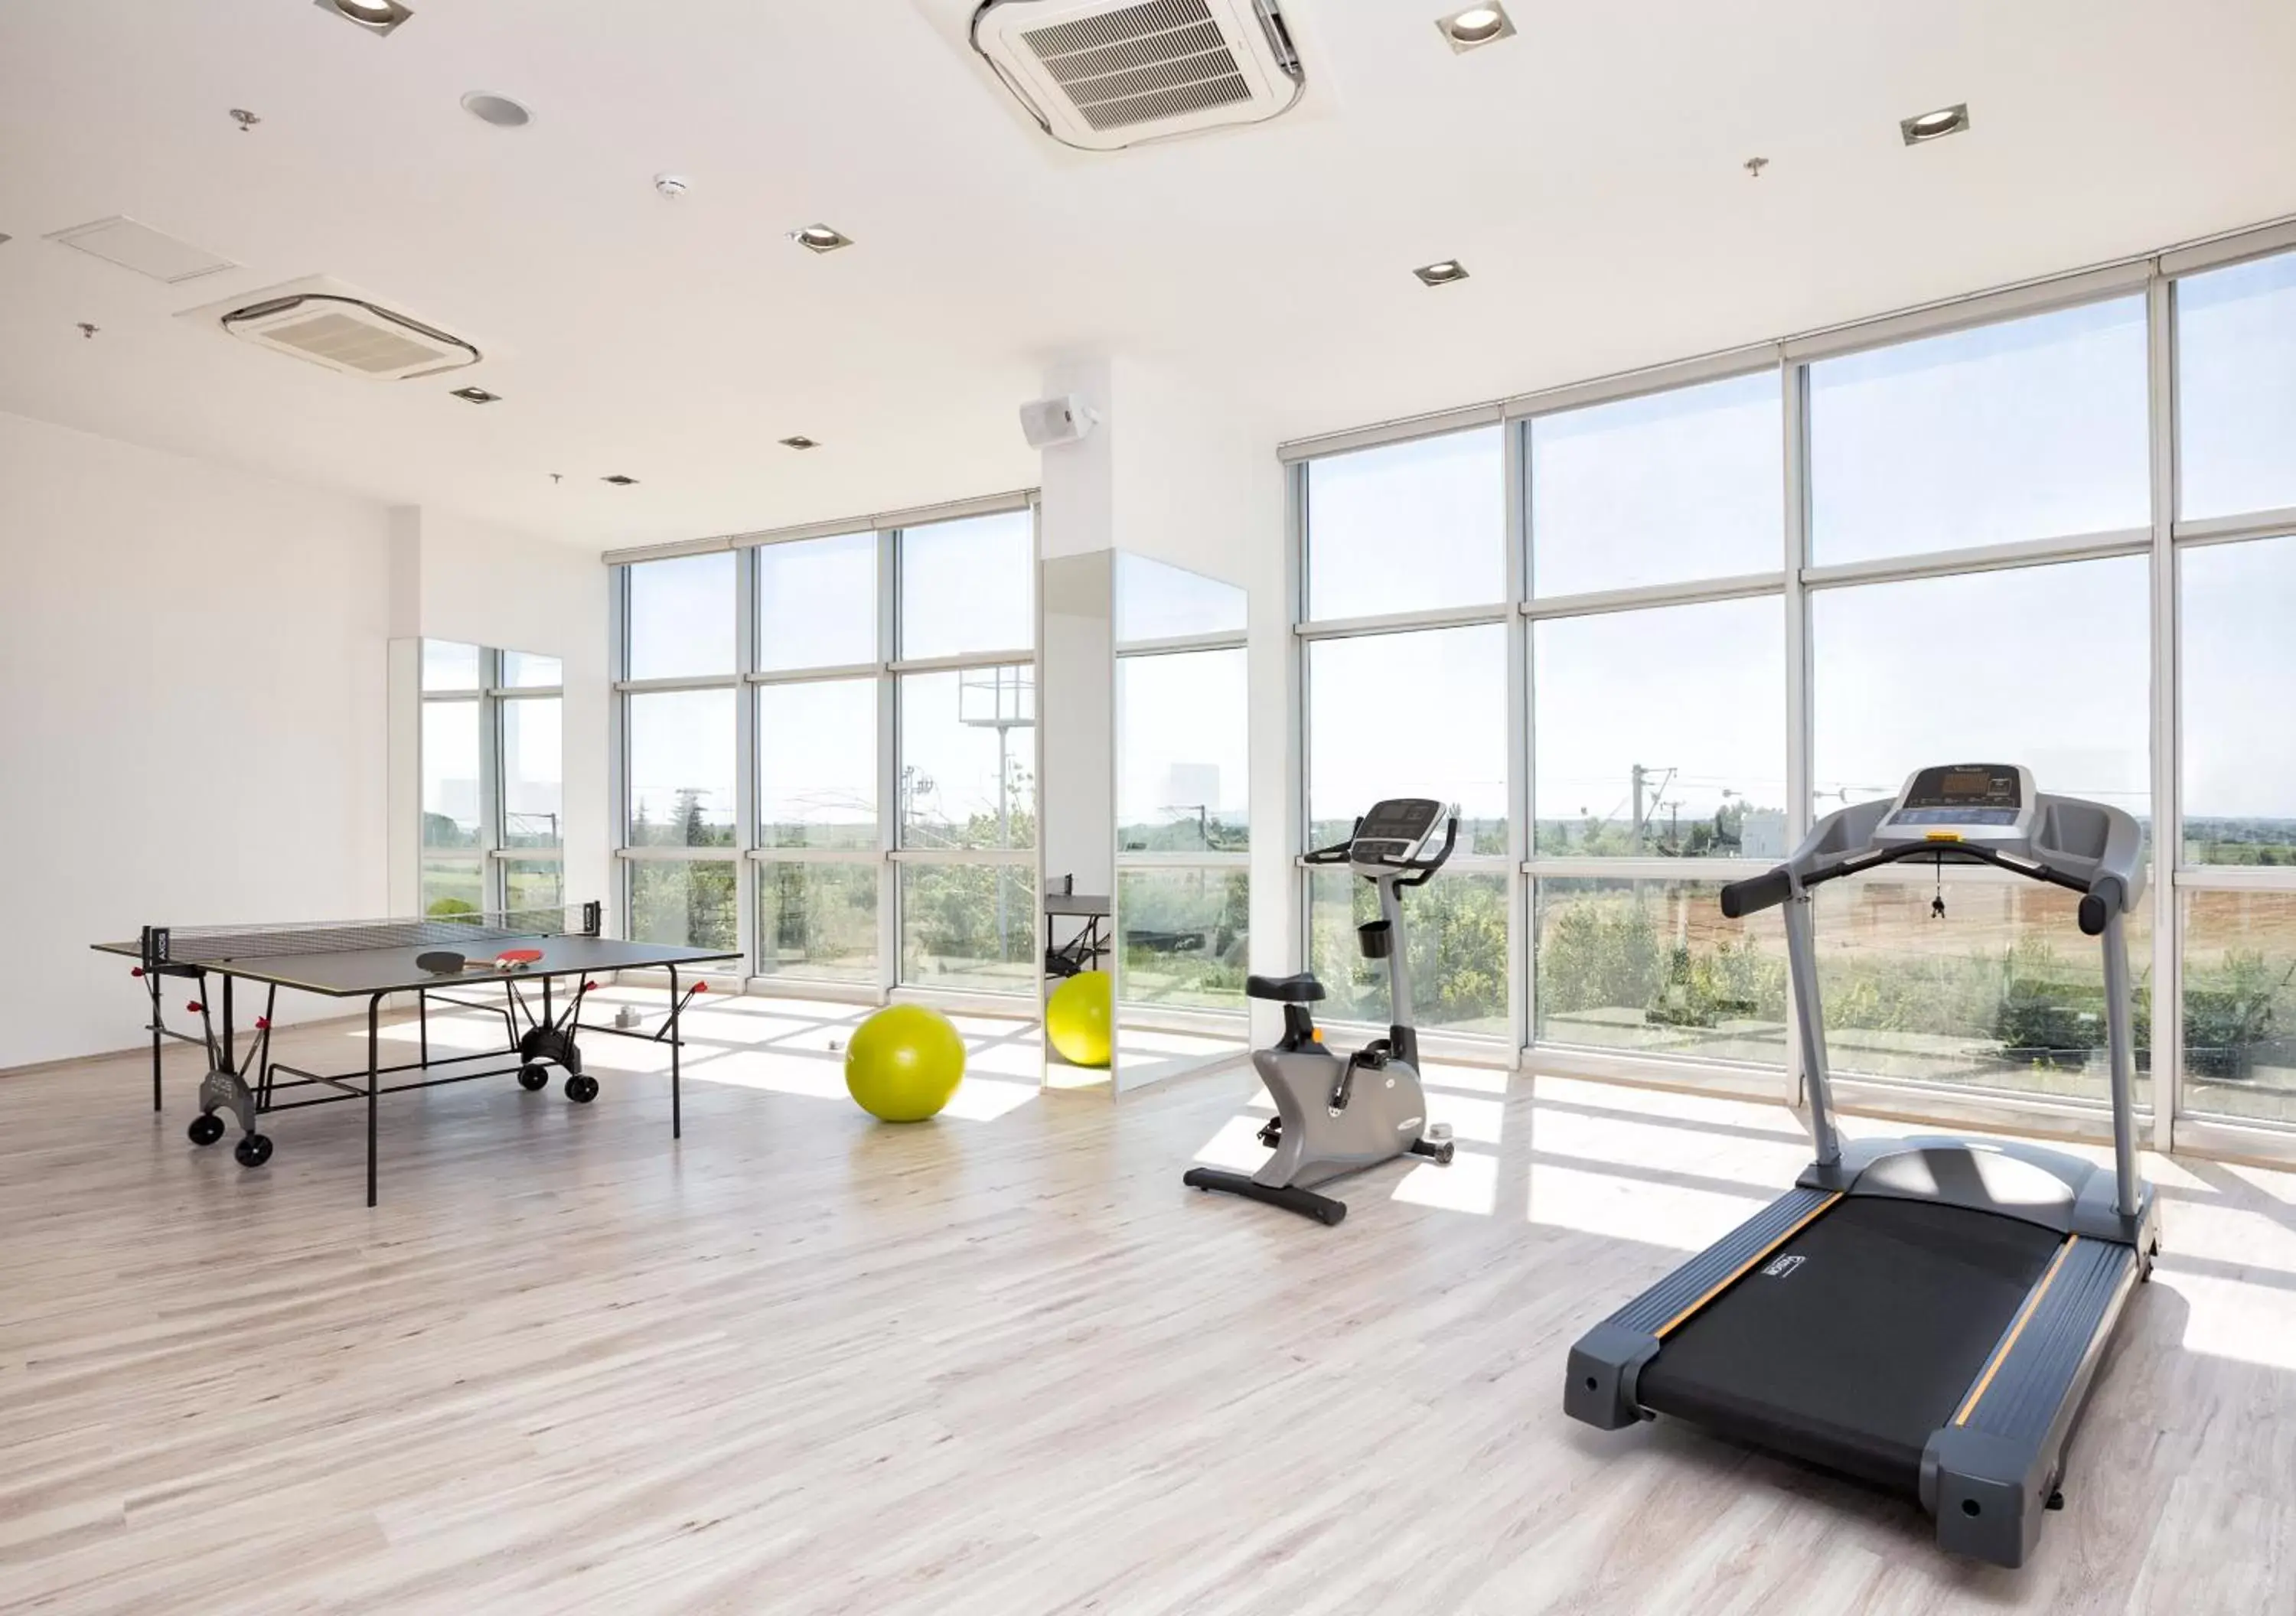 Fitness centre/facilities, Fitness Center/Facilities in Ramada Hotel by Wyndham Edirne